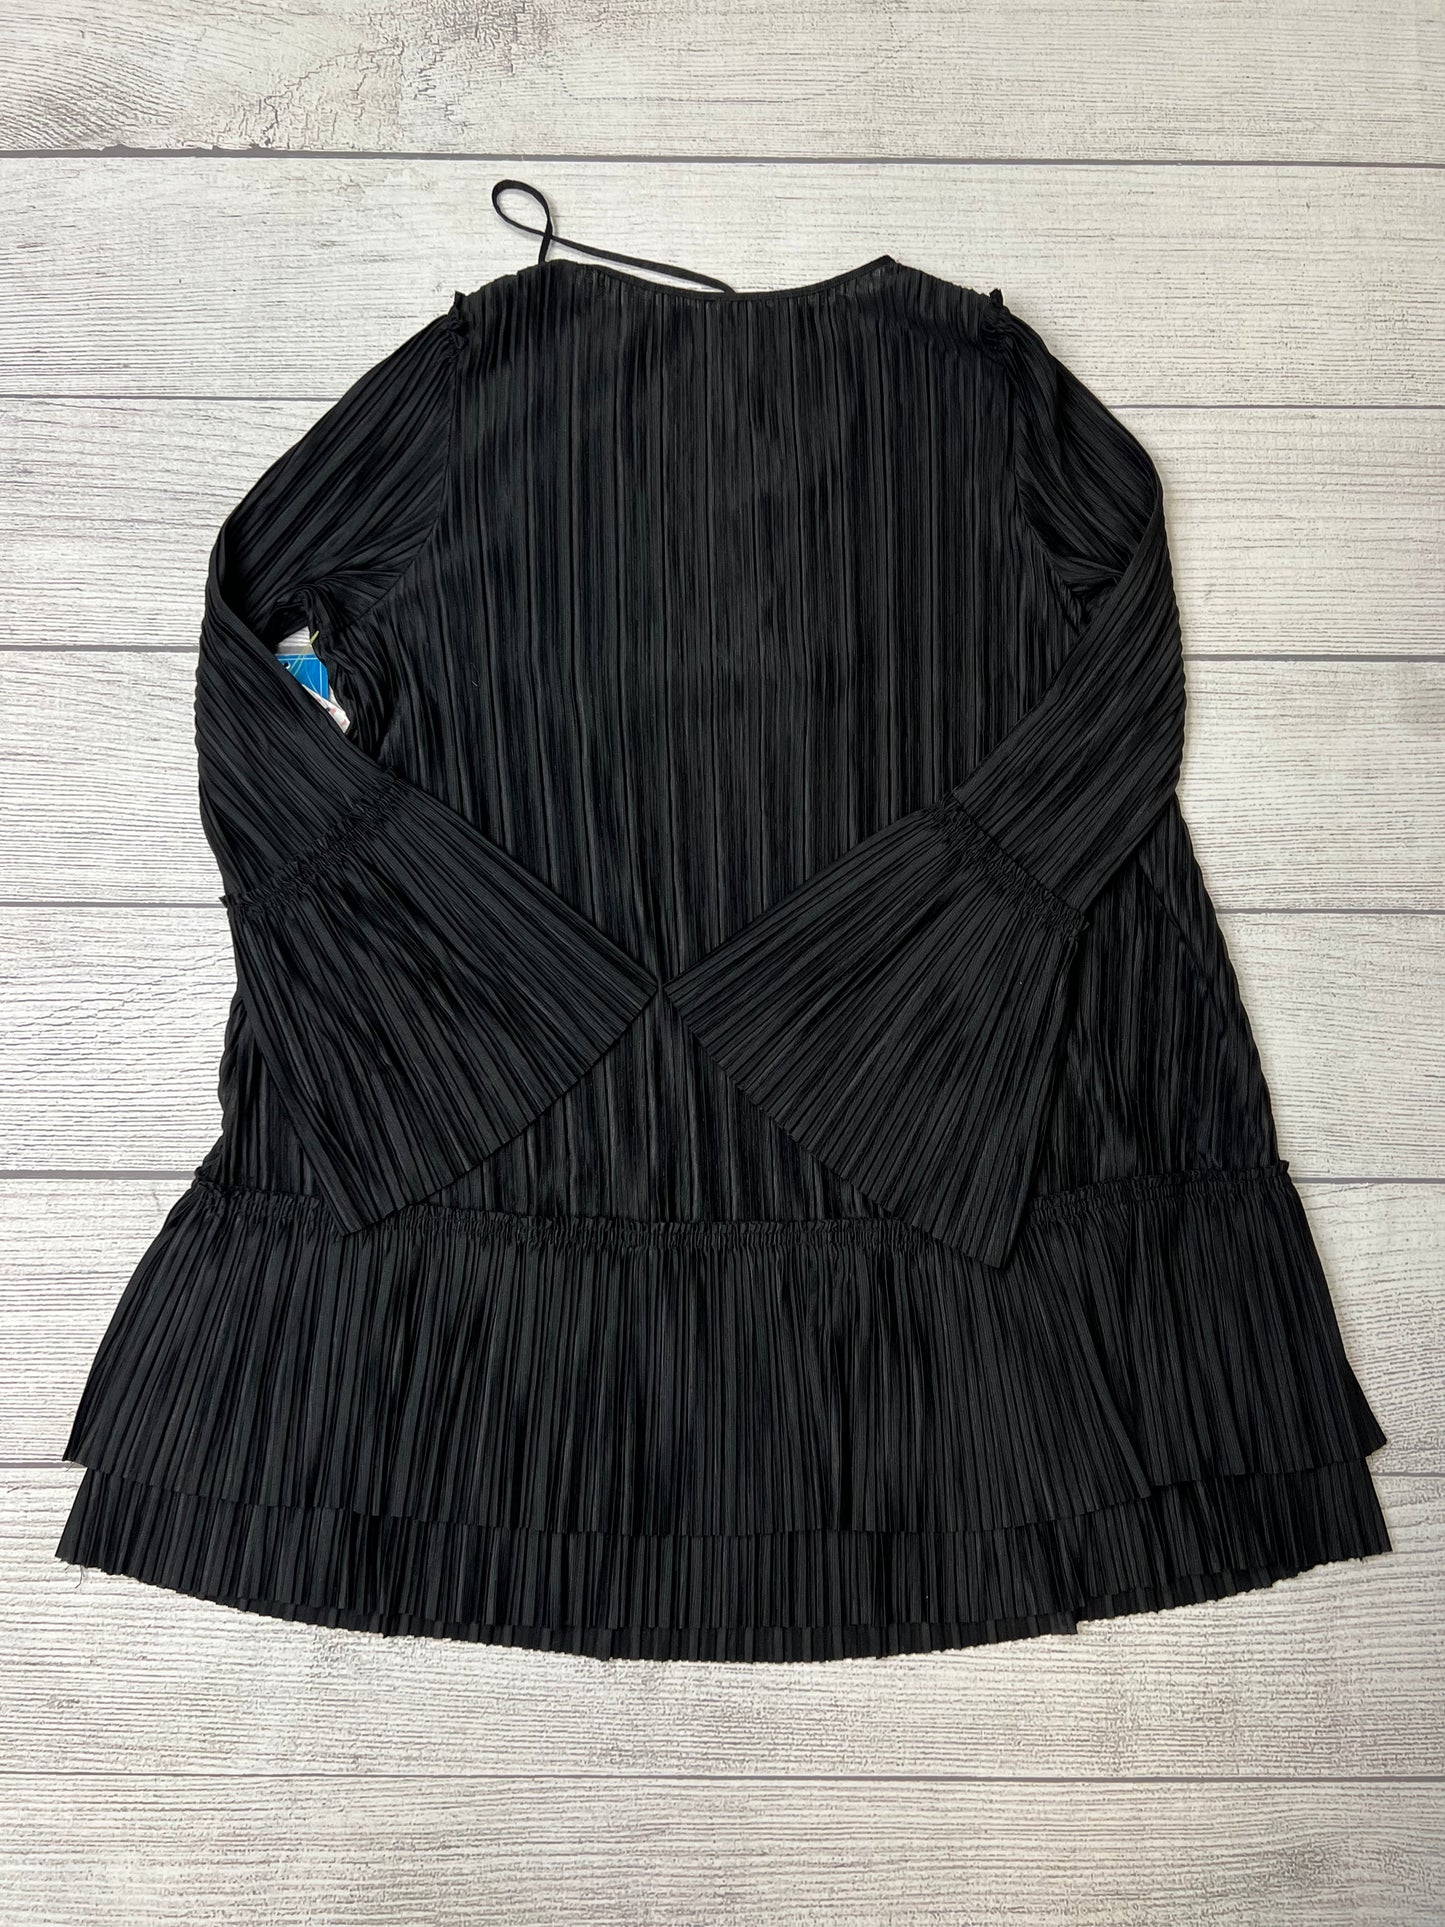 Black Dress Casual Short Free People, Size M